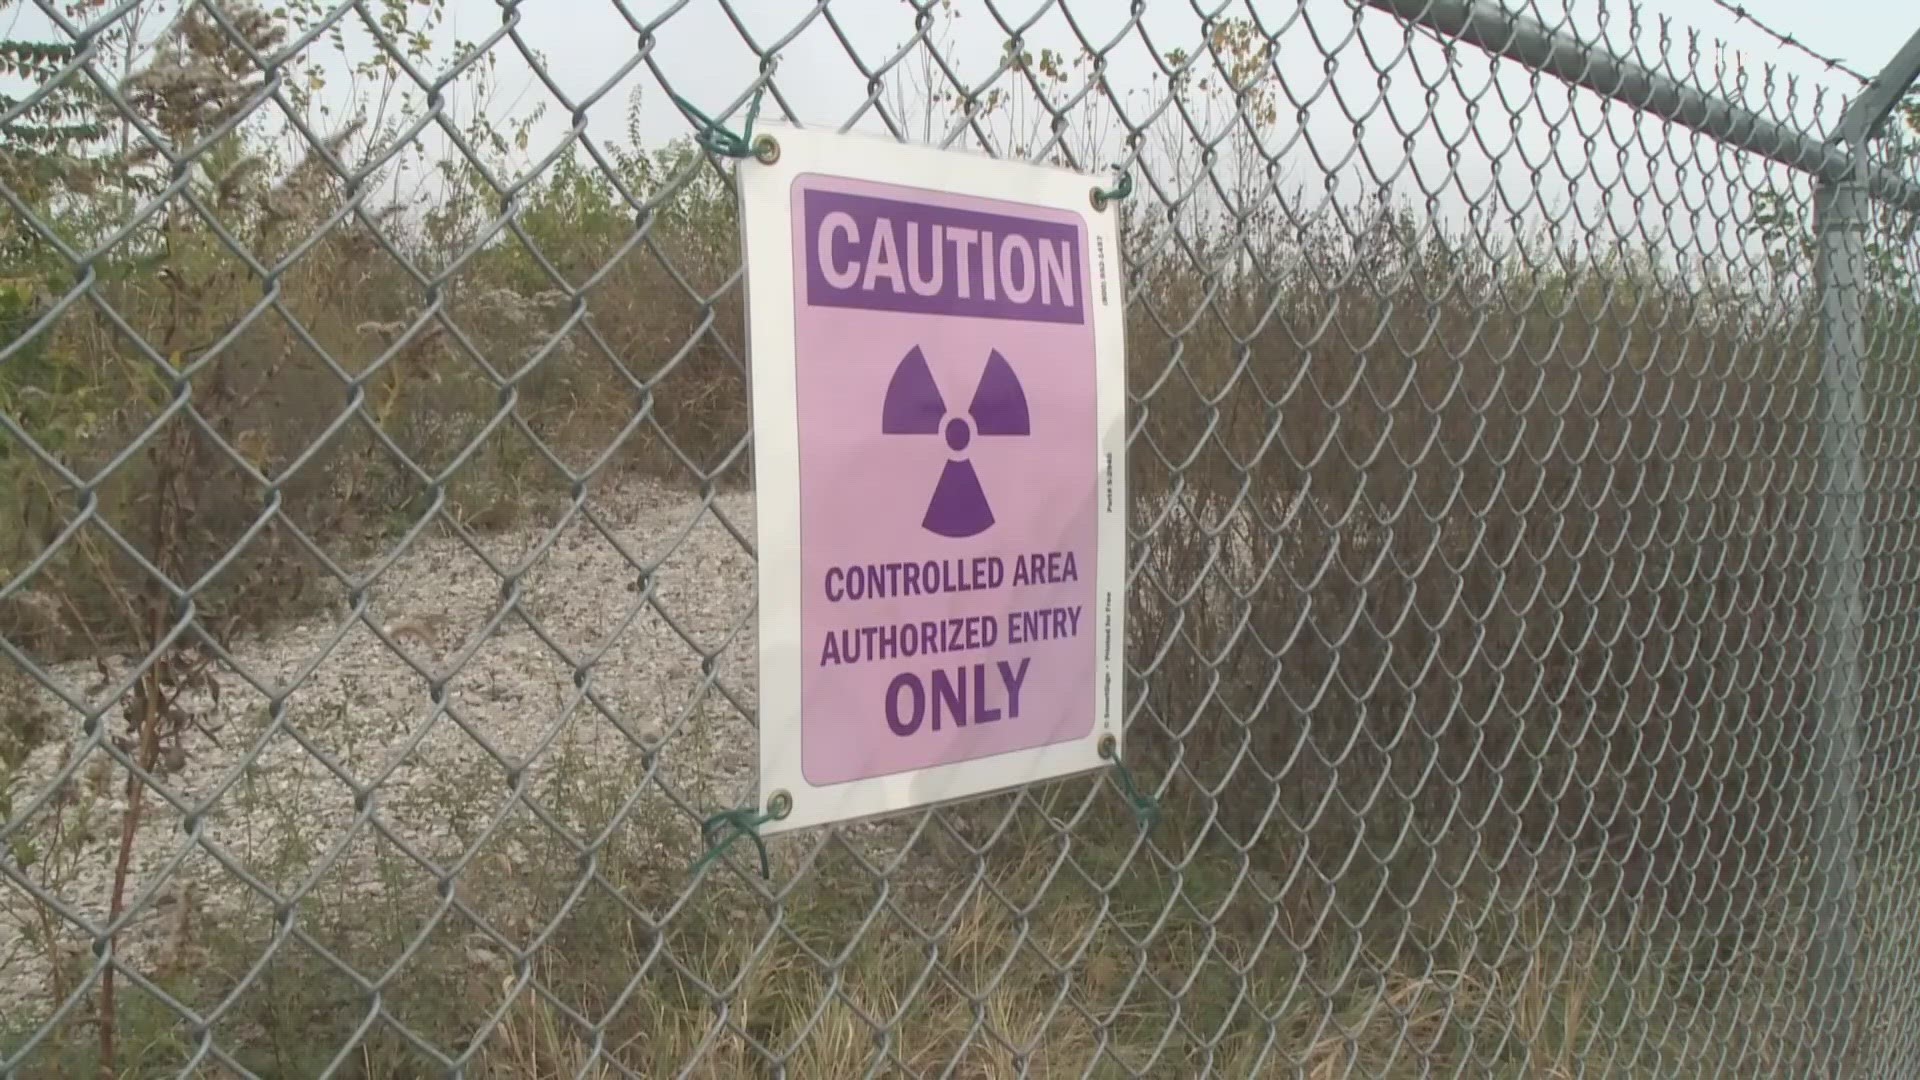 Environmental advocates are demanding action from state leaders in Missouri. They say people who live here should be compensated because radioactive was left behind.